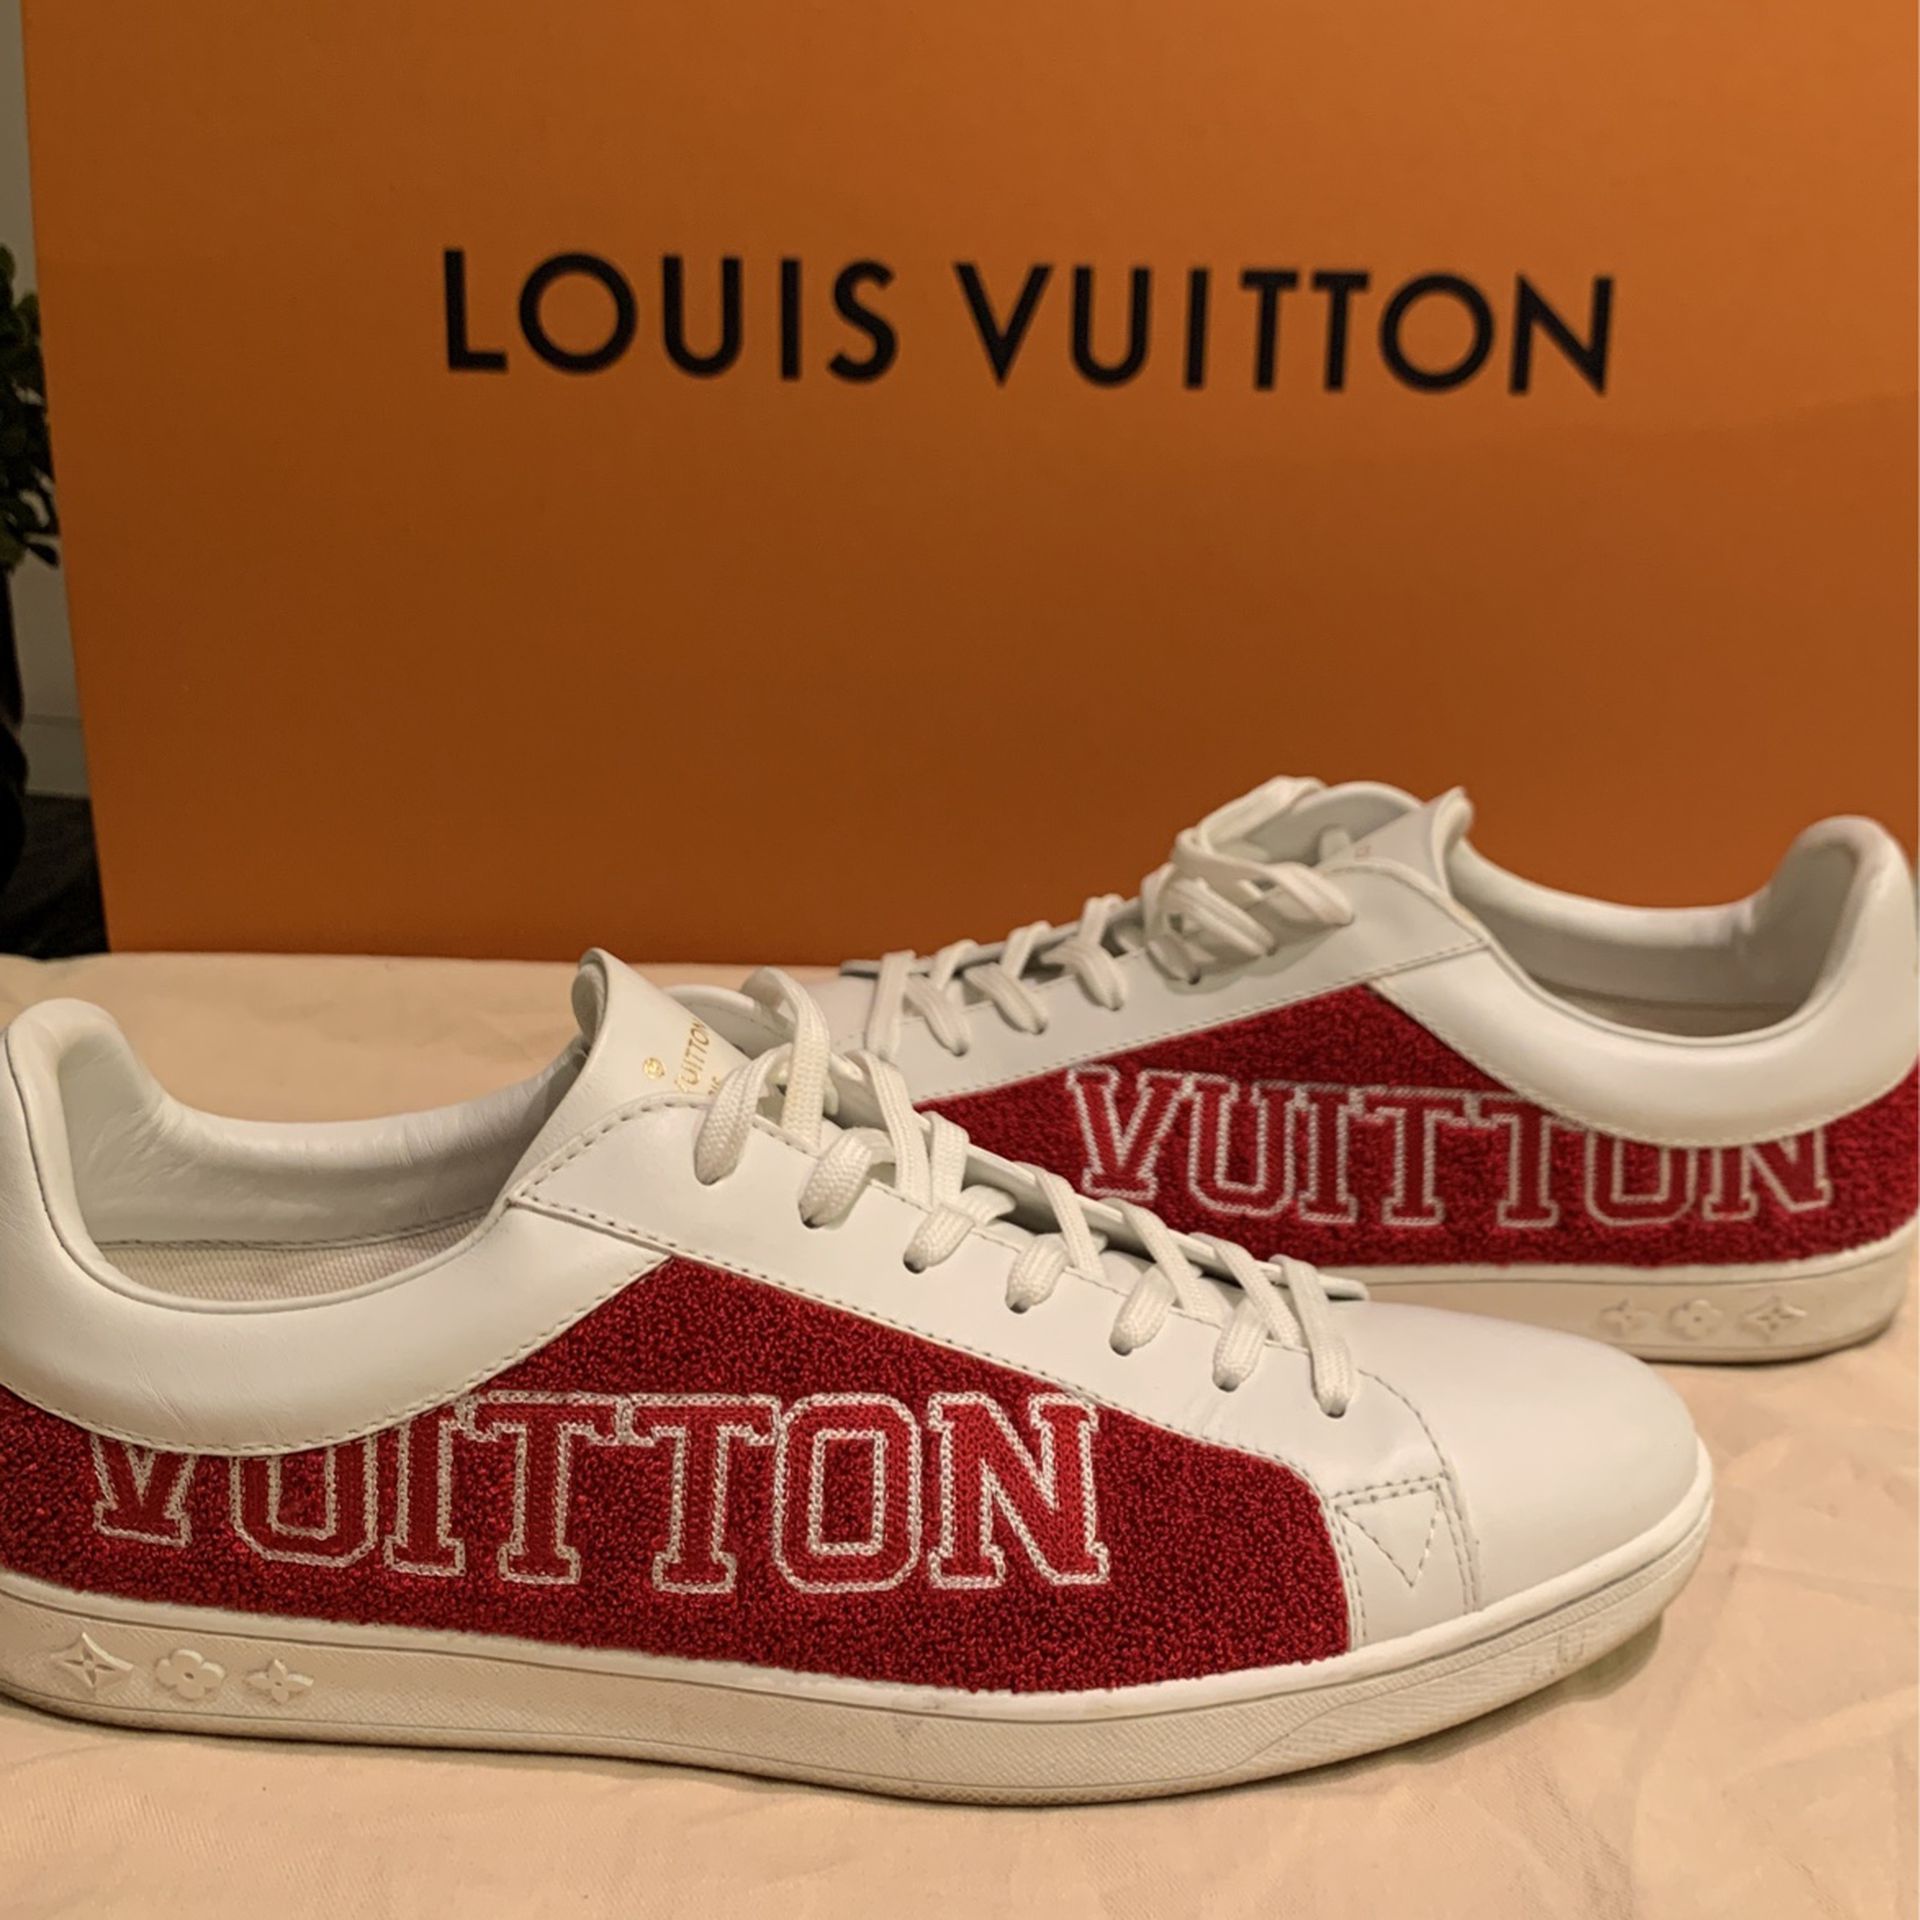 Louis Vuitton Luxembourg Black Sneaker Shoes Men 9 New for Sale in  Fullerton, CA - OfferUp